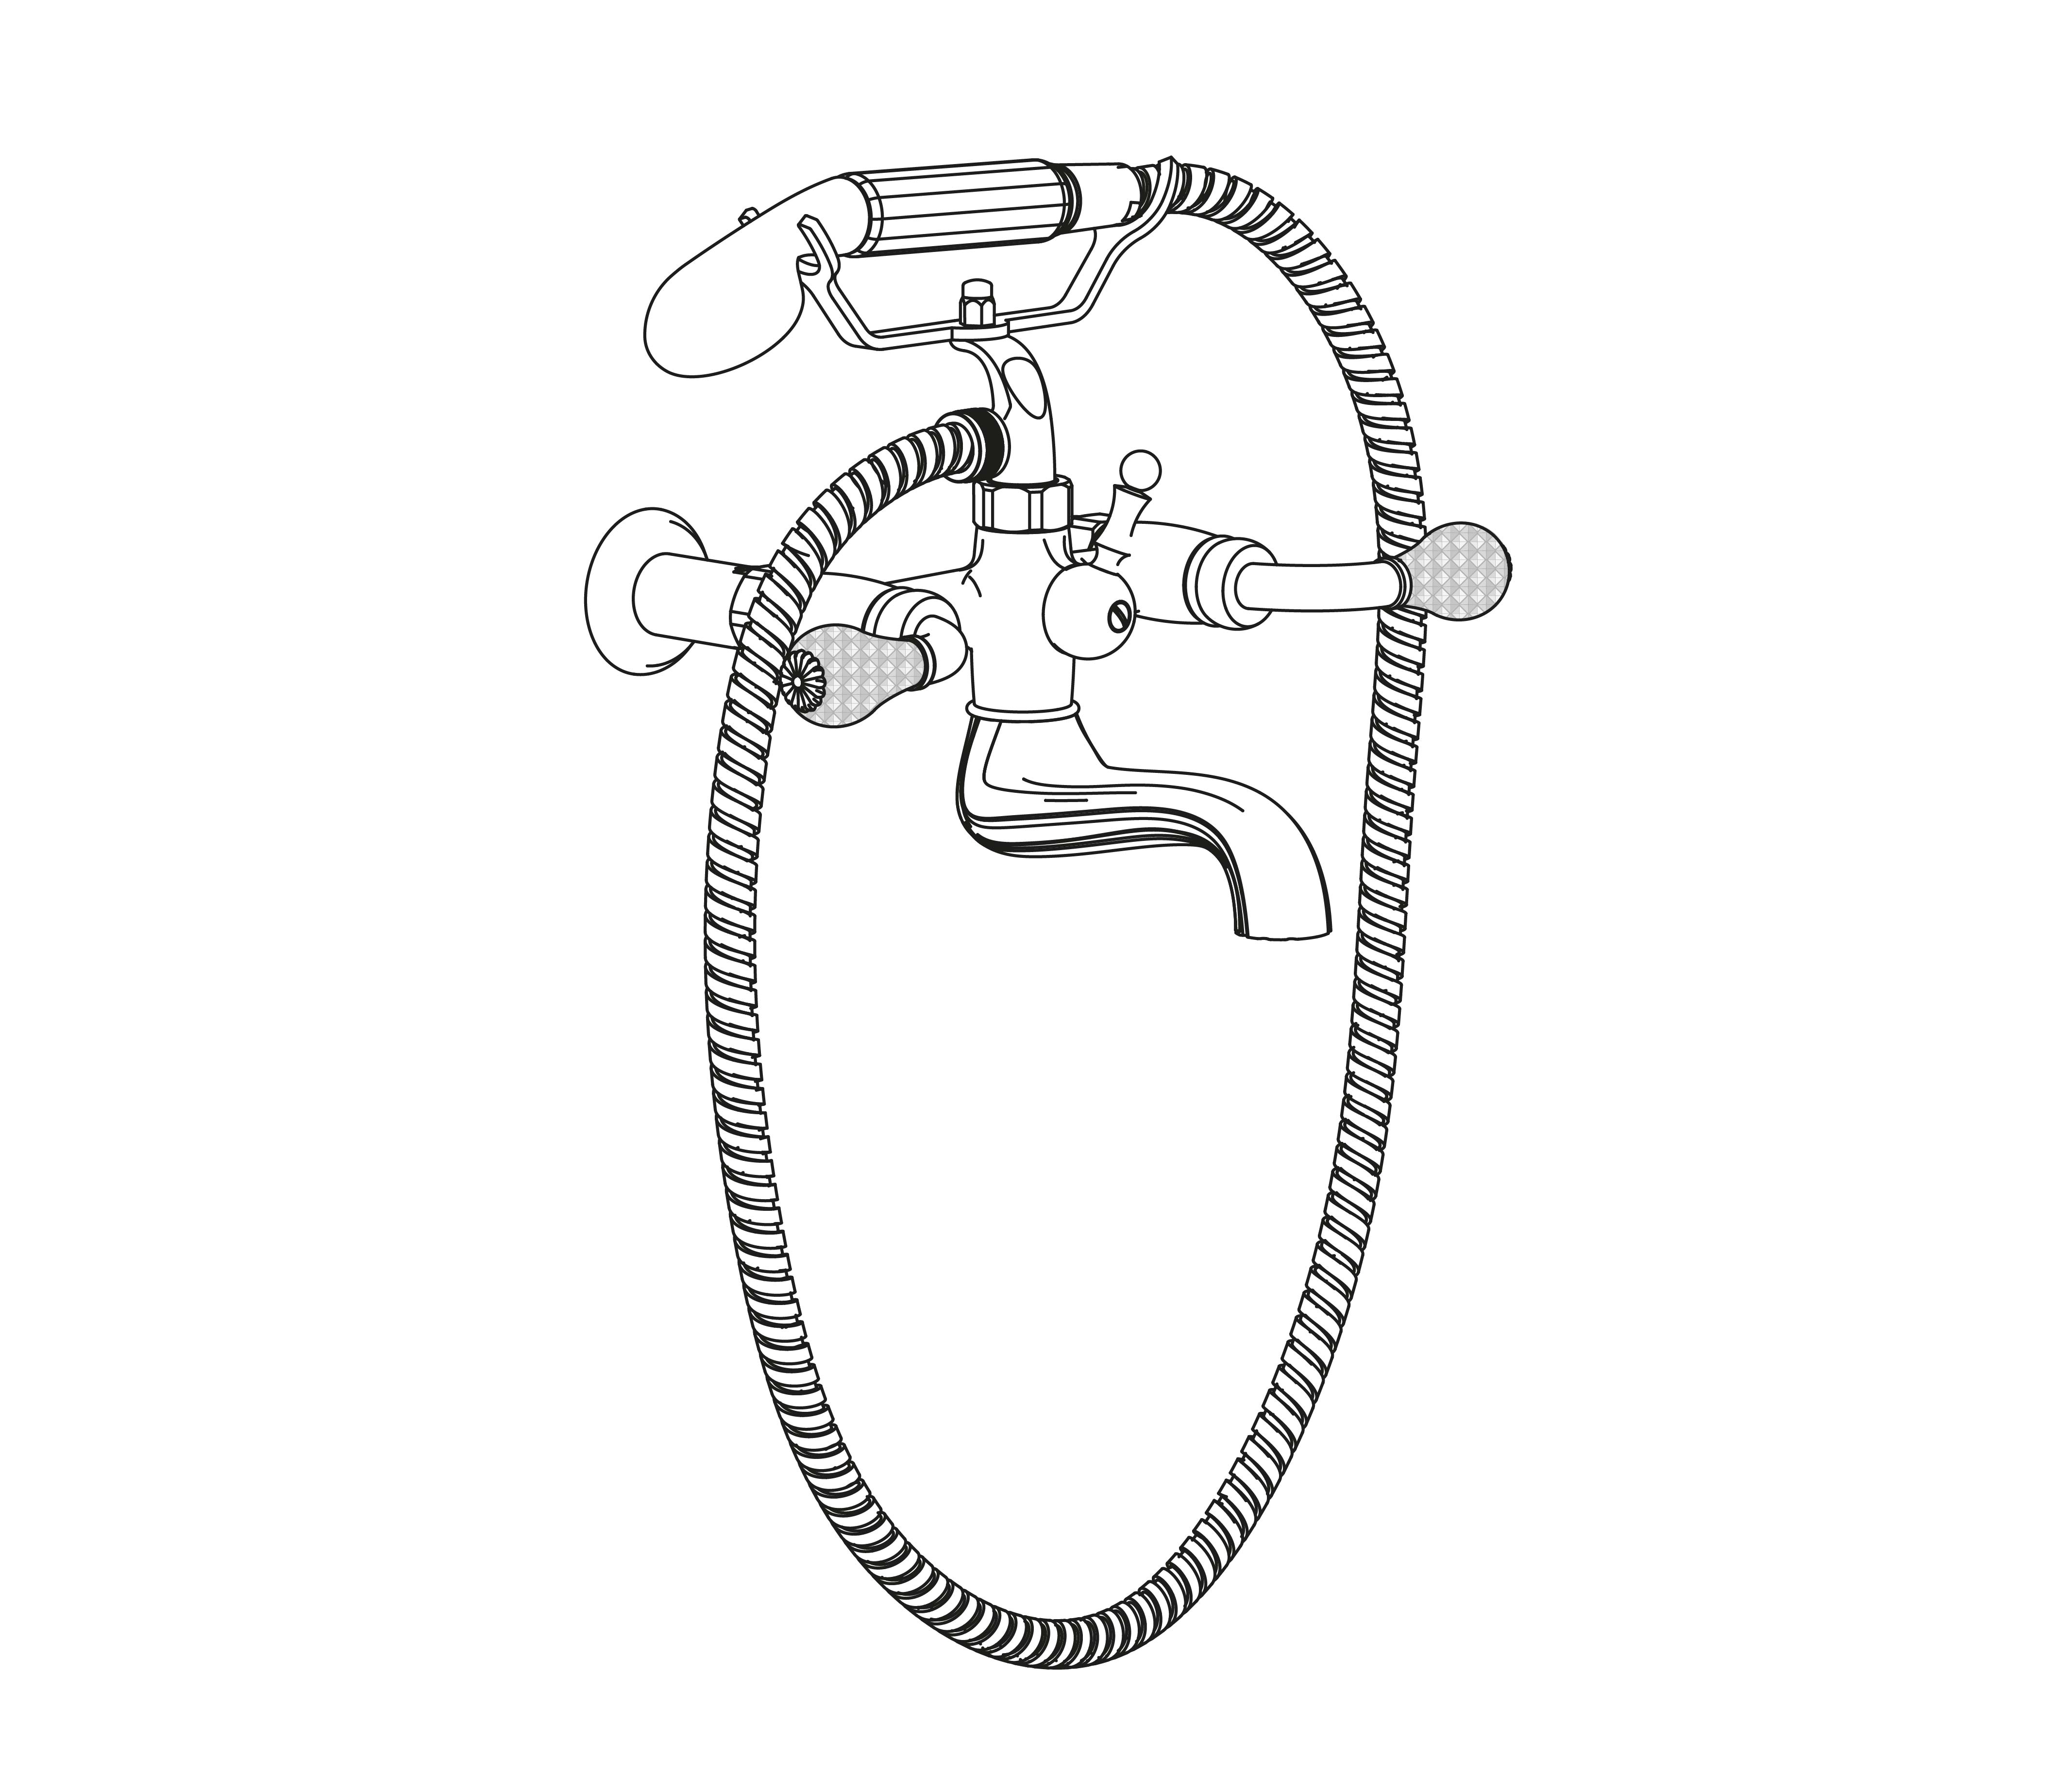 C56-3201 Wall mounted bath and shower mixer